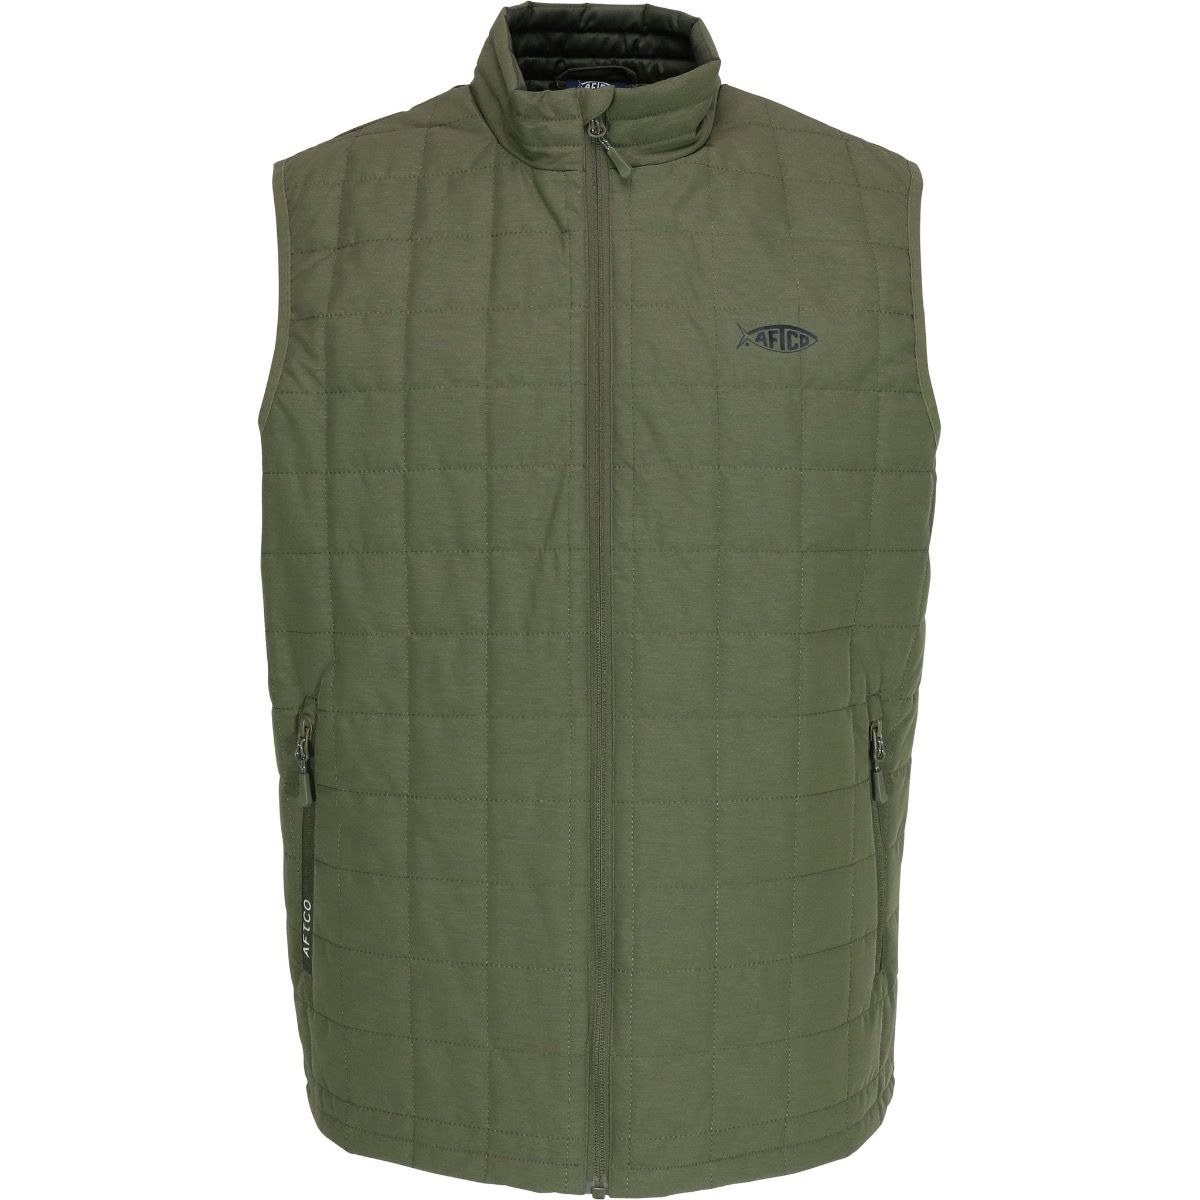 Pufferfish Insulated Vest - Olive